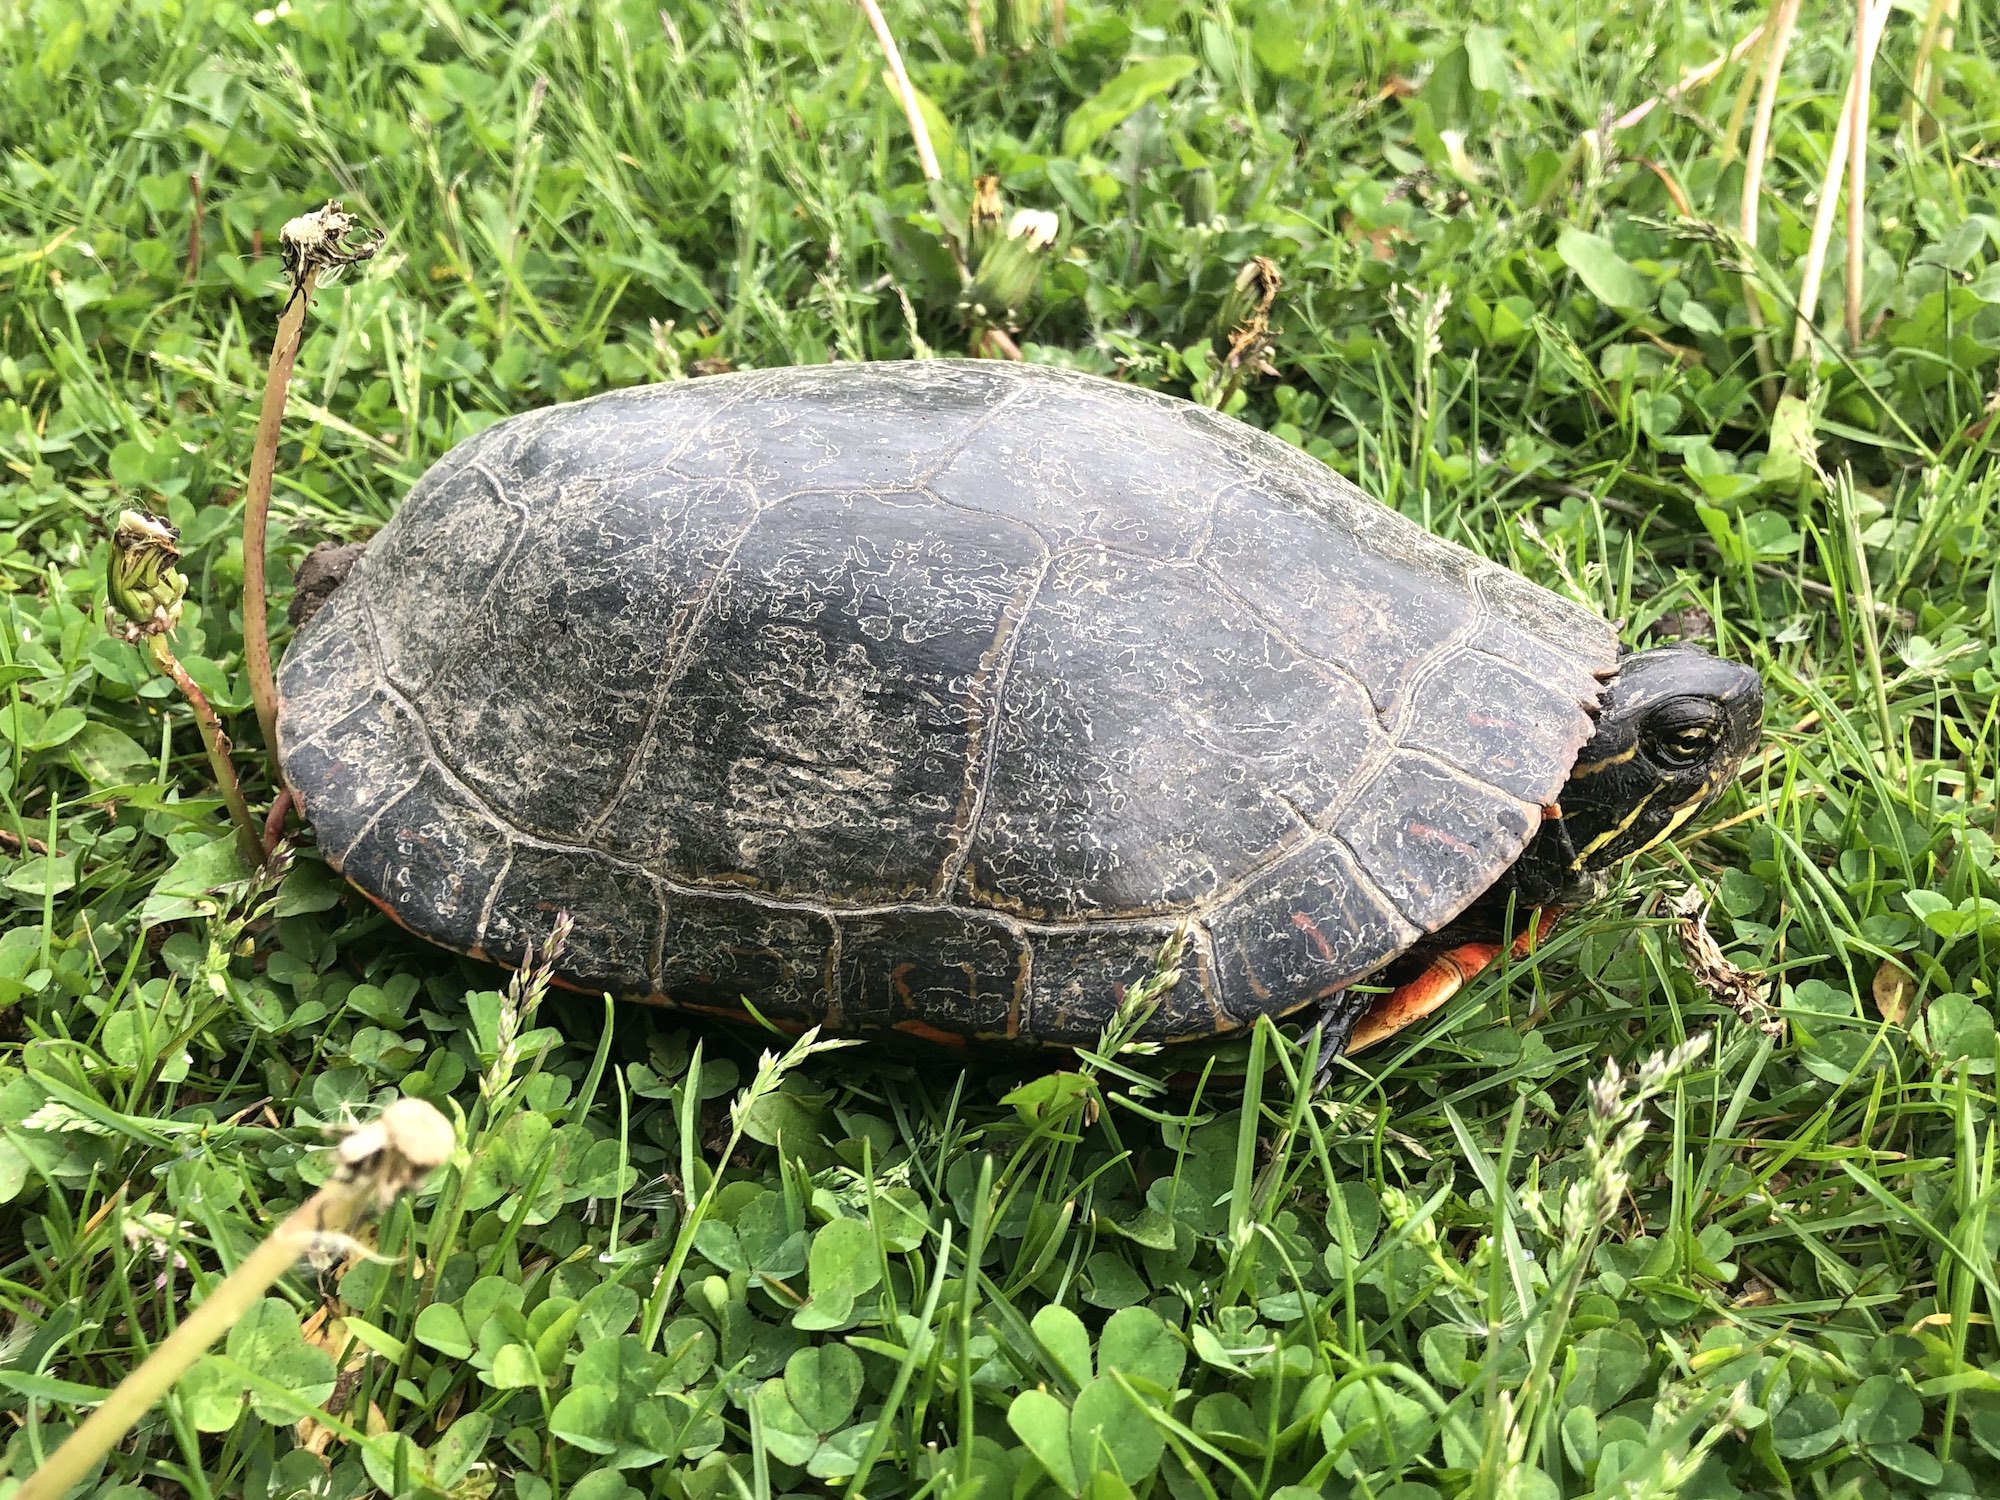 Painted Turtle in E. Ray Stevens Pond and Aquatic Gardens on corner of Manitou Way and Nakoma Road in Madison, Wisconsin on May 21, 2021.